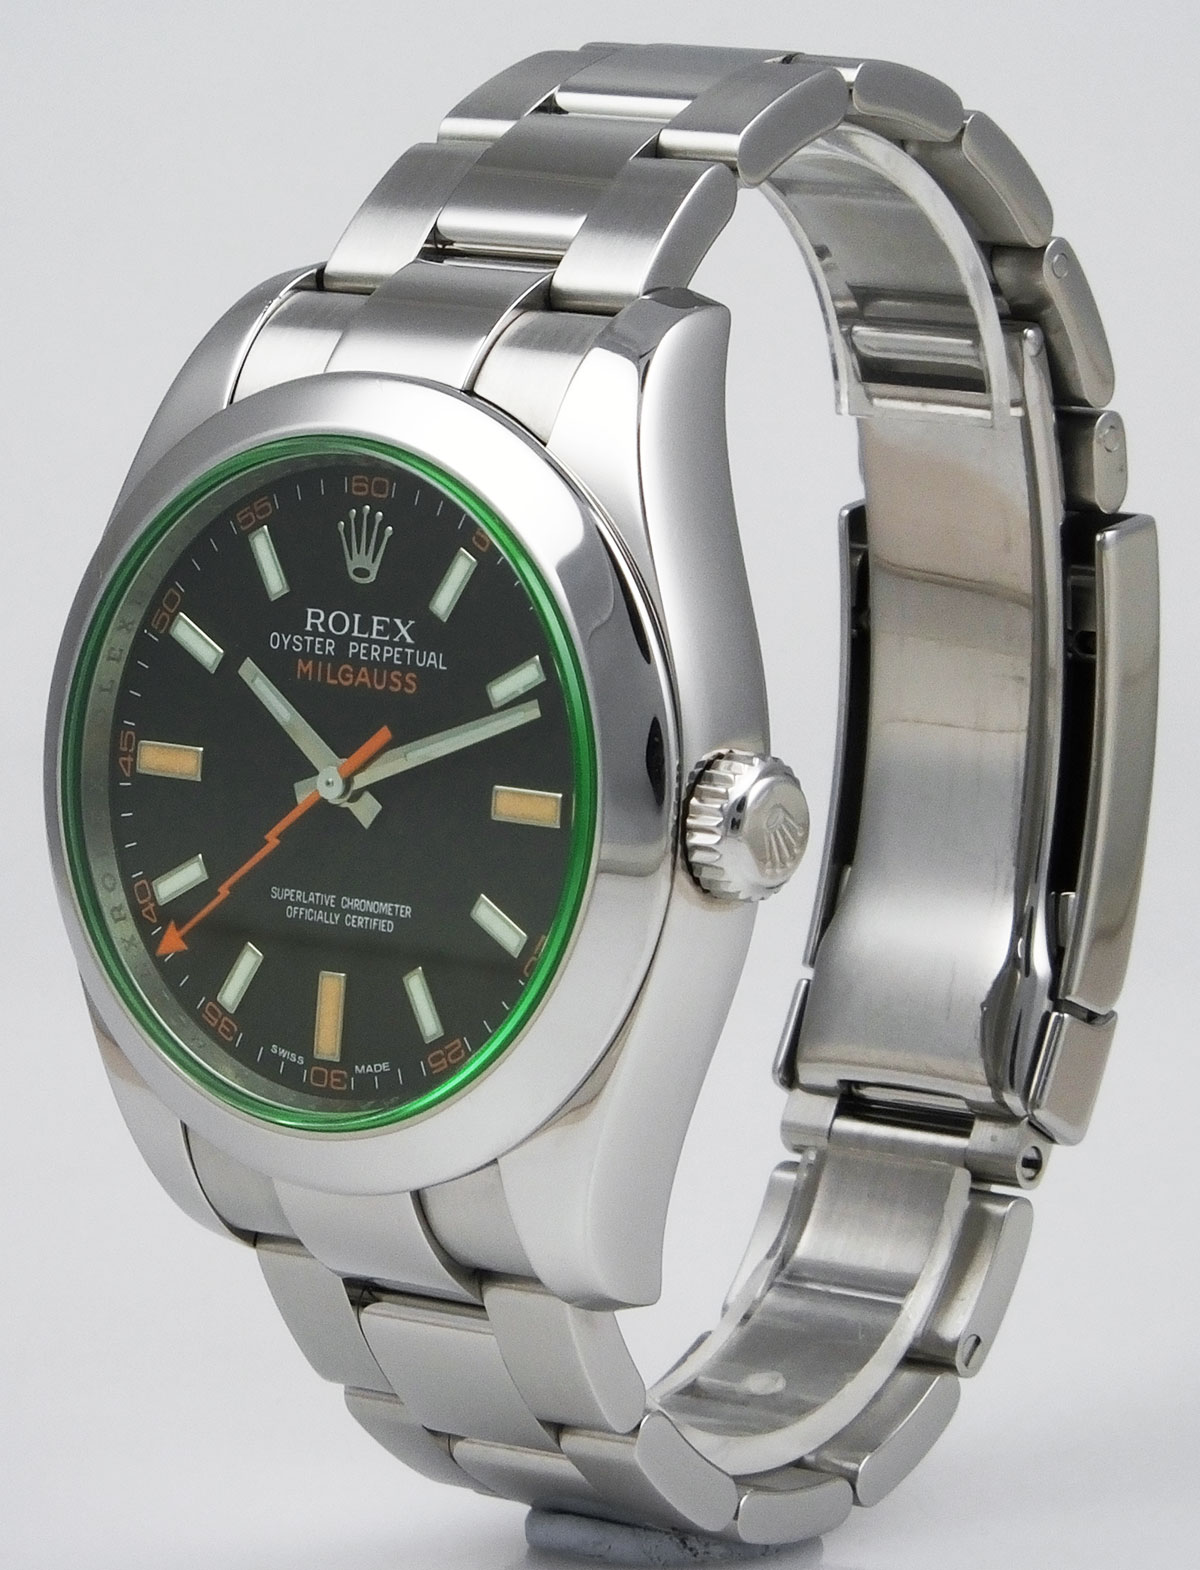 Rolex Oyster Perpetual Milgauss - Black Dial Green Sapphire Crystal ...